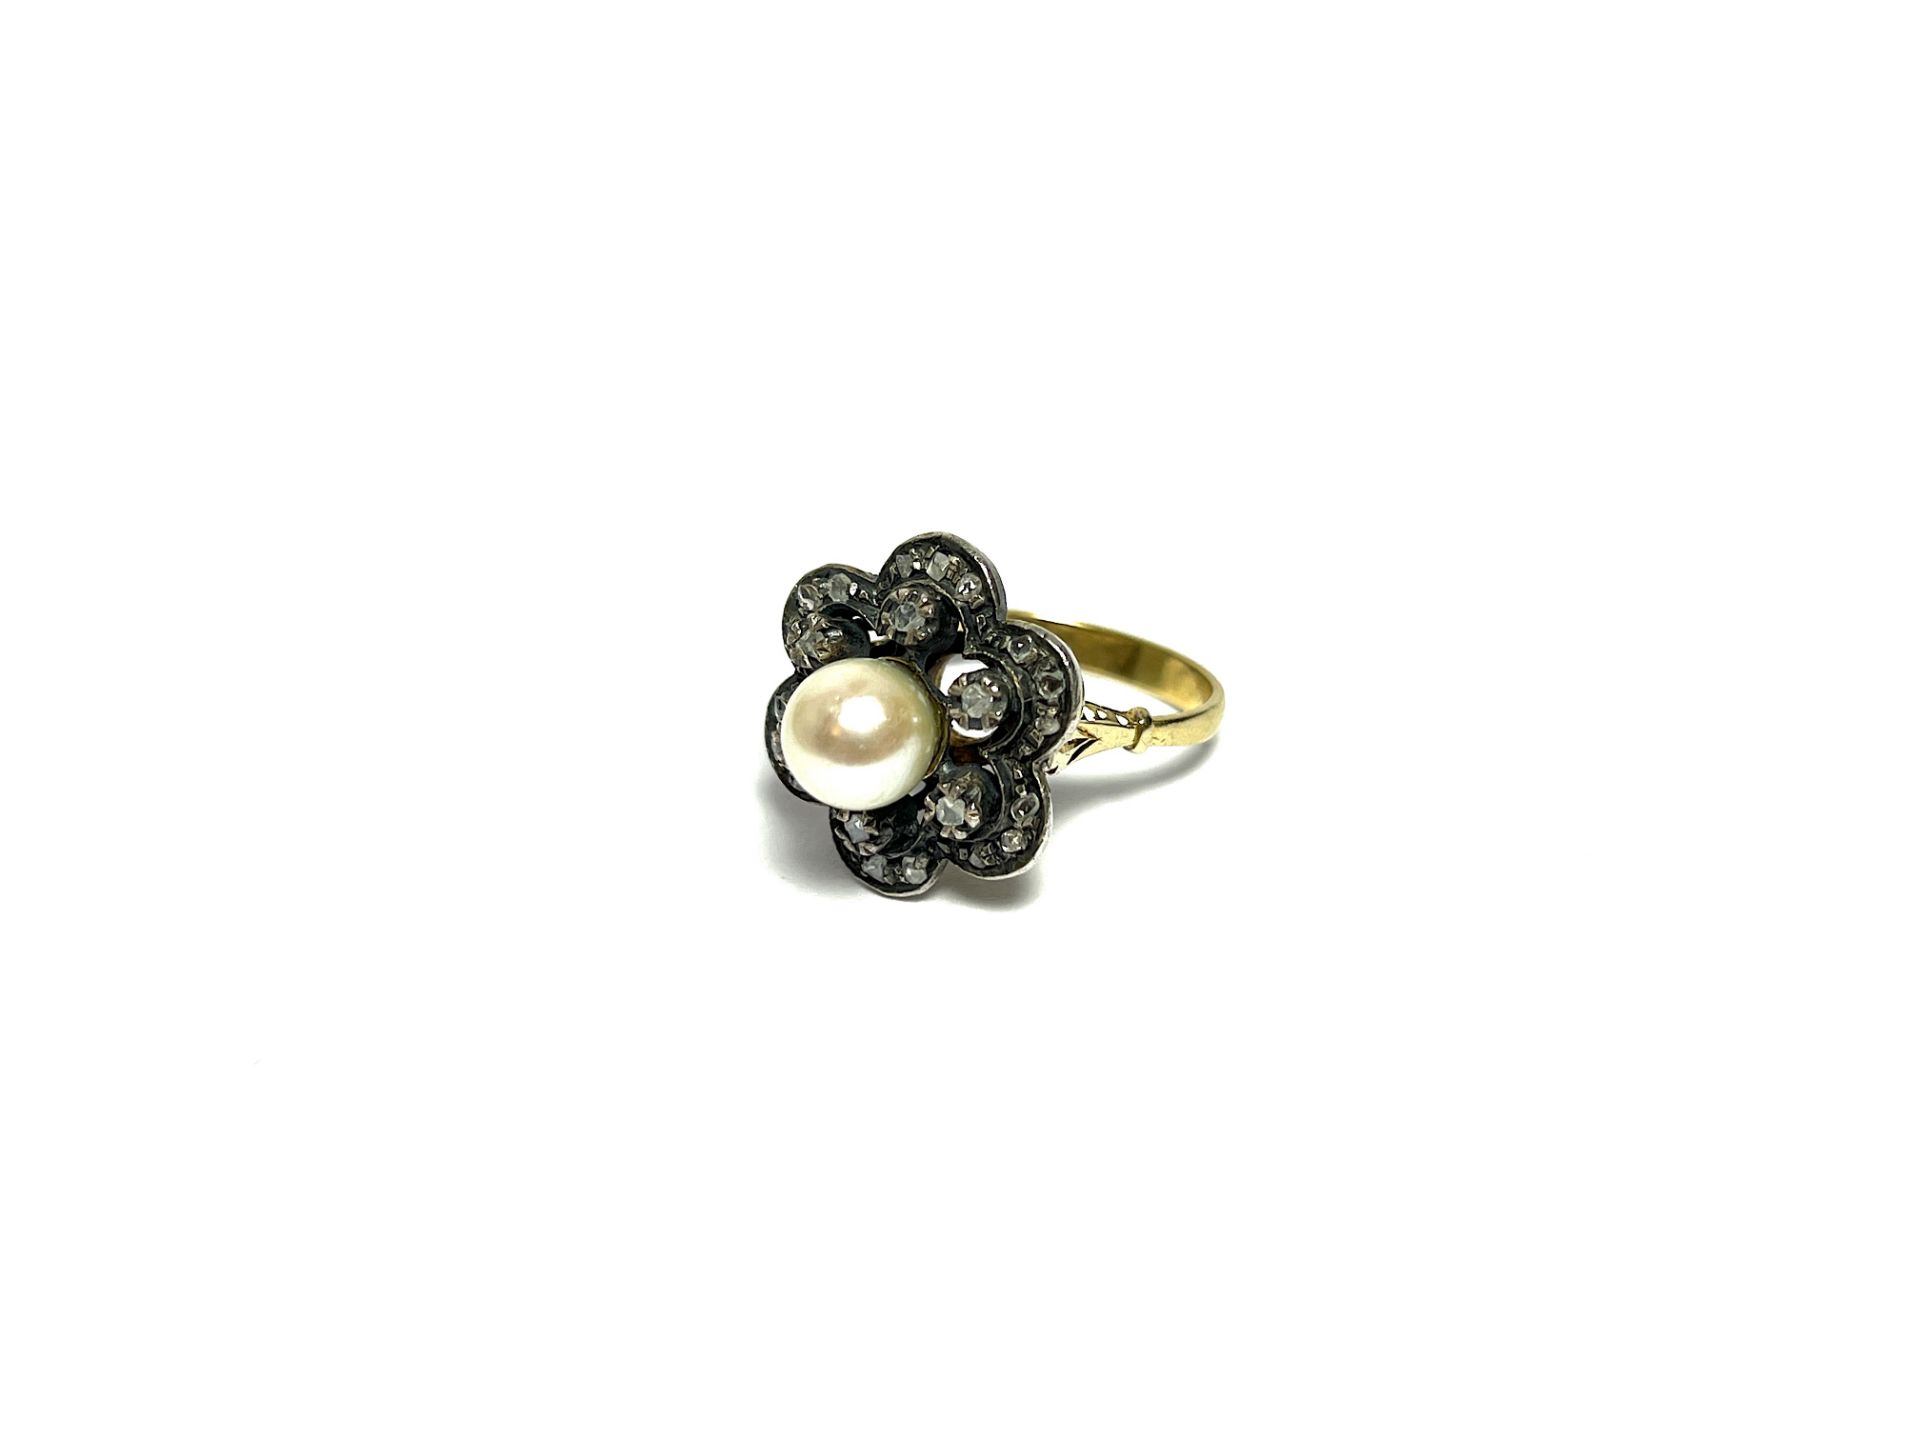 Antique pearl ring